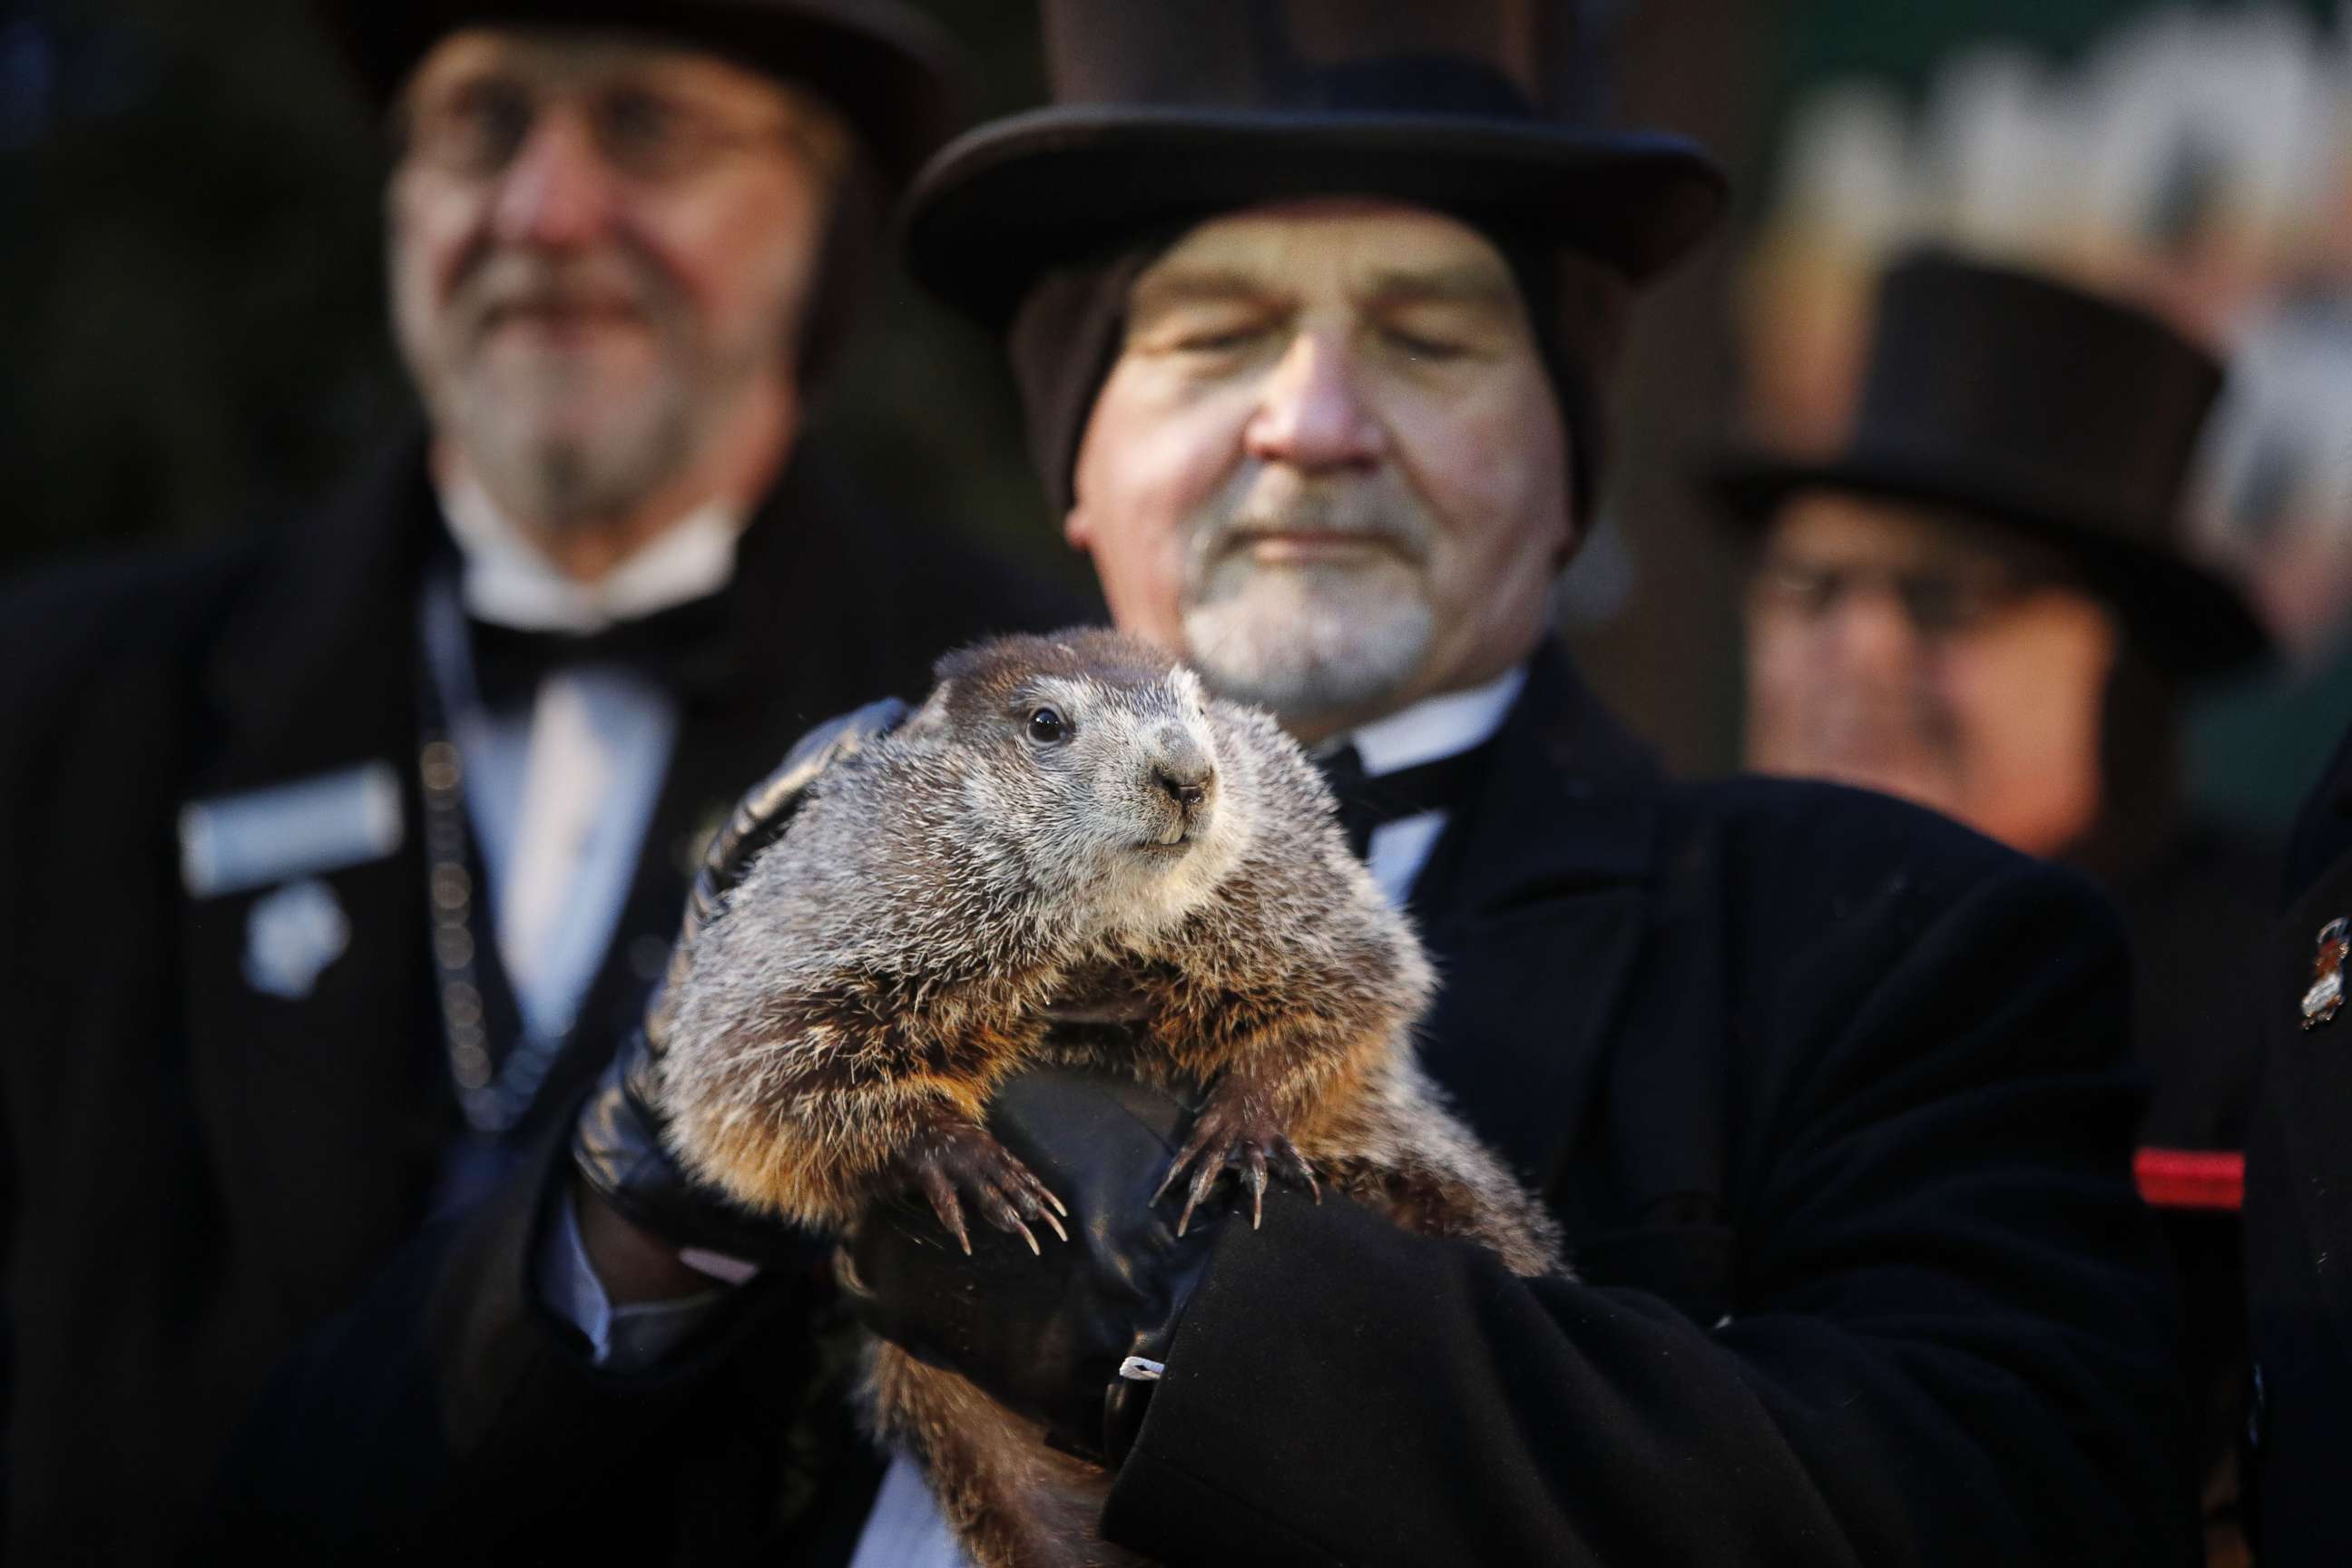 PHOTO: Groundhog Club co-handler John Grifiths holds Punsxutawney Phil the weather prognosticating groundhog during the Groundhog Day celebratio, in Punxsutawney, Penn., Feb. 2, 2018.  Phil saw his shadow and predicted six more weeks of winter.